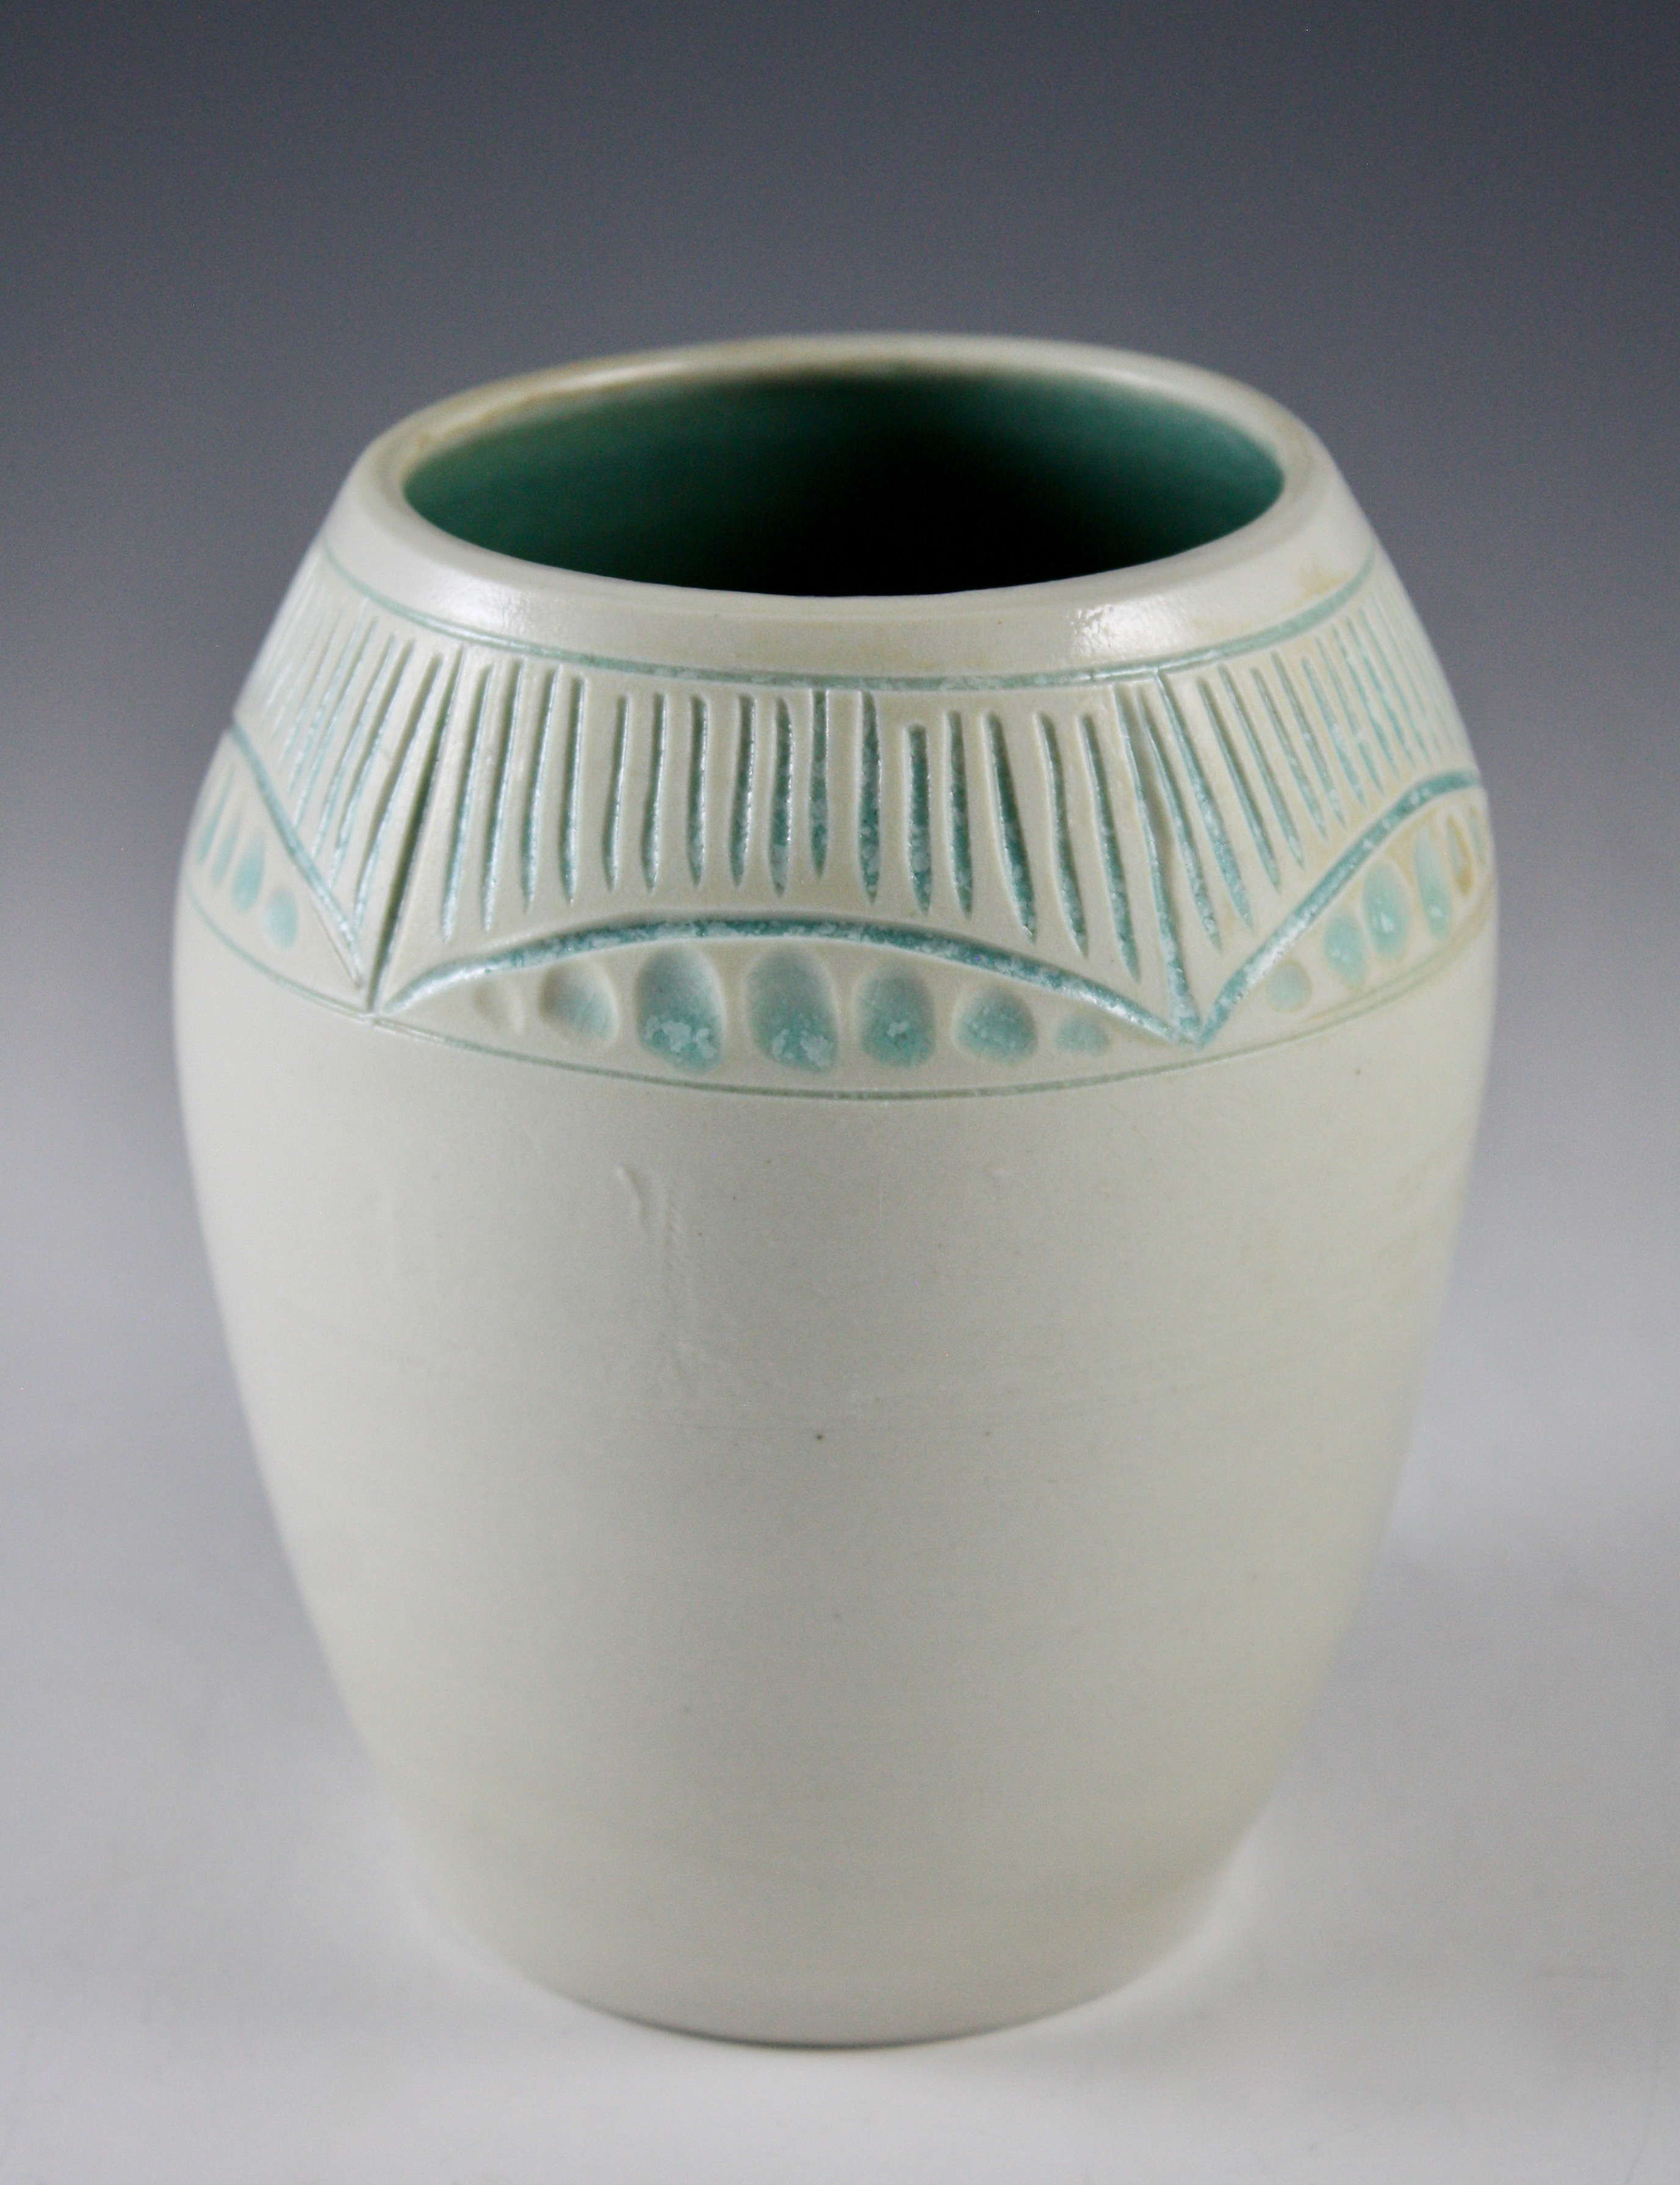 Carved Porcelain Vase with Oribe Accents 21-328